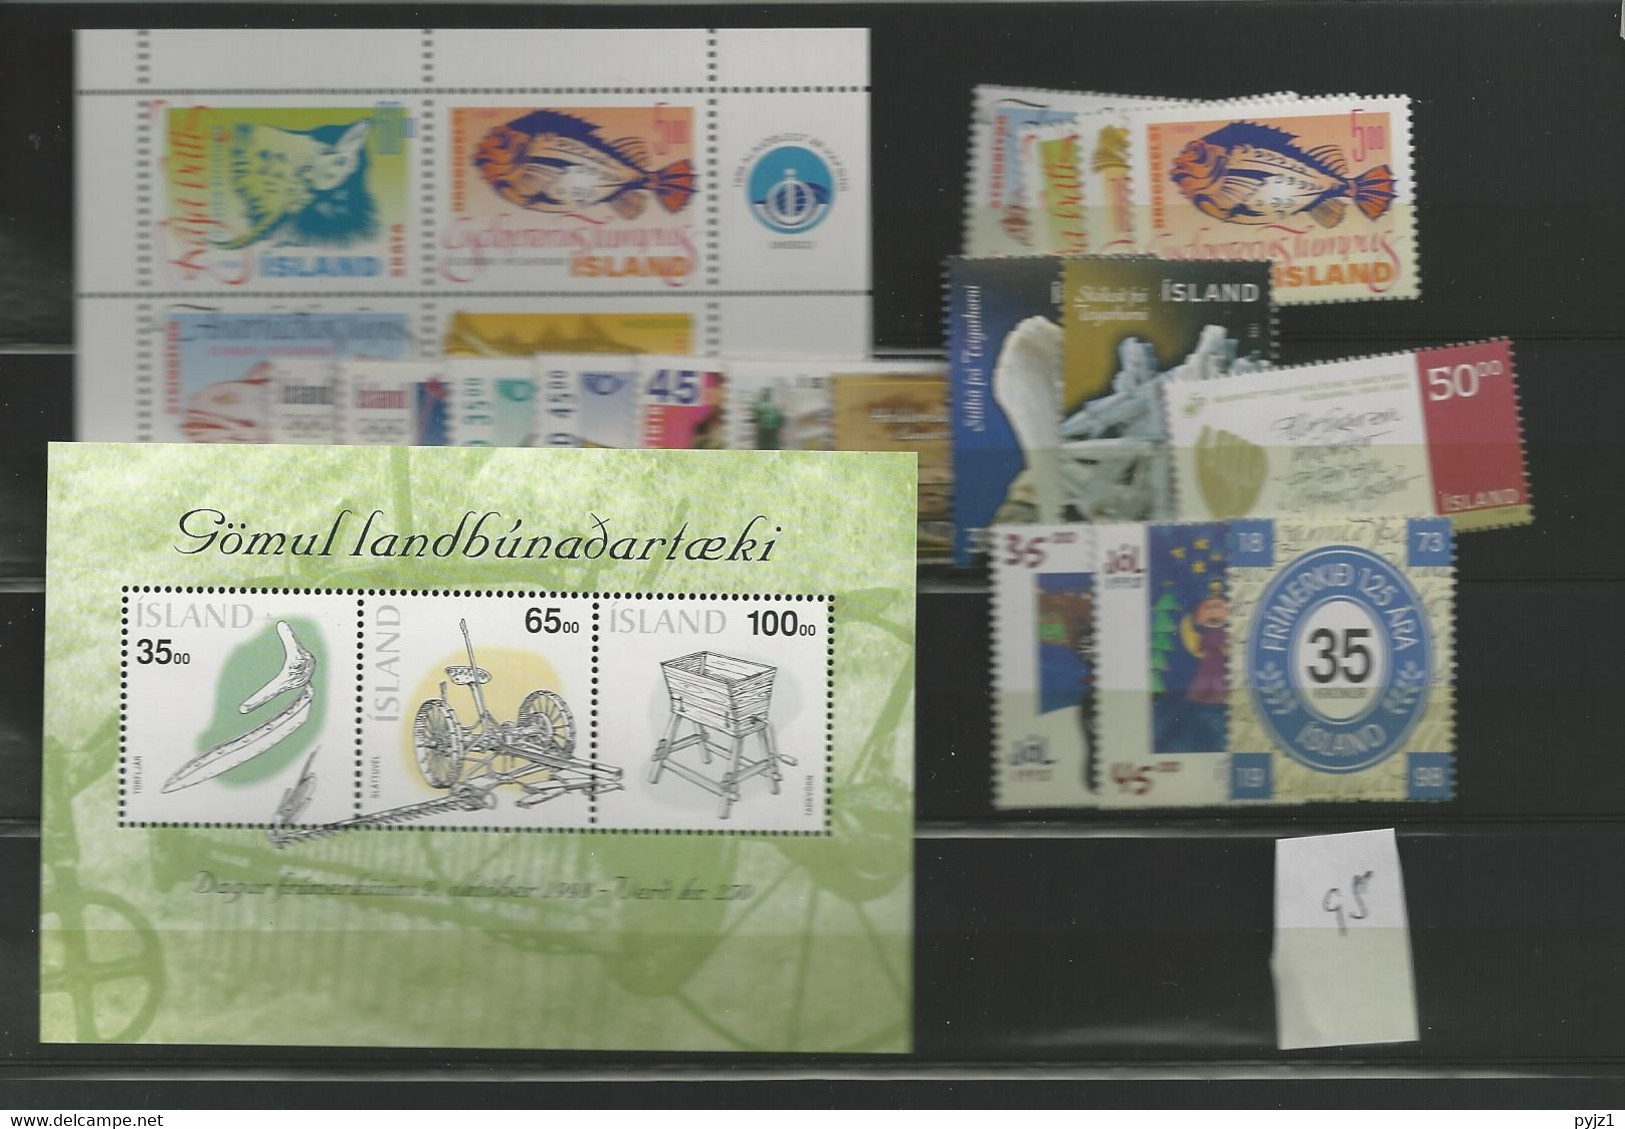 1998 MNH Iceland, Year Complete, Postfris** - Annate Complete